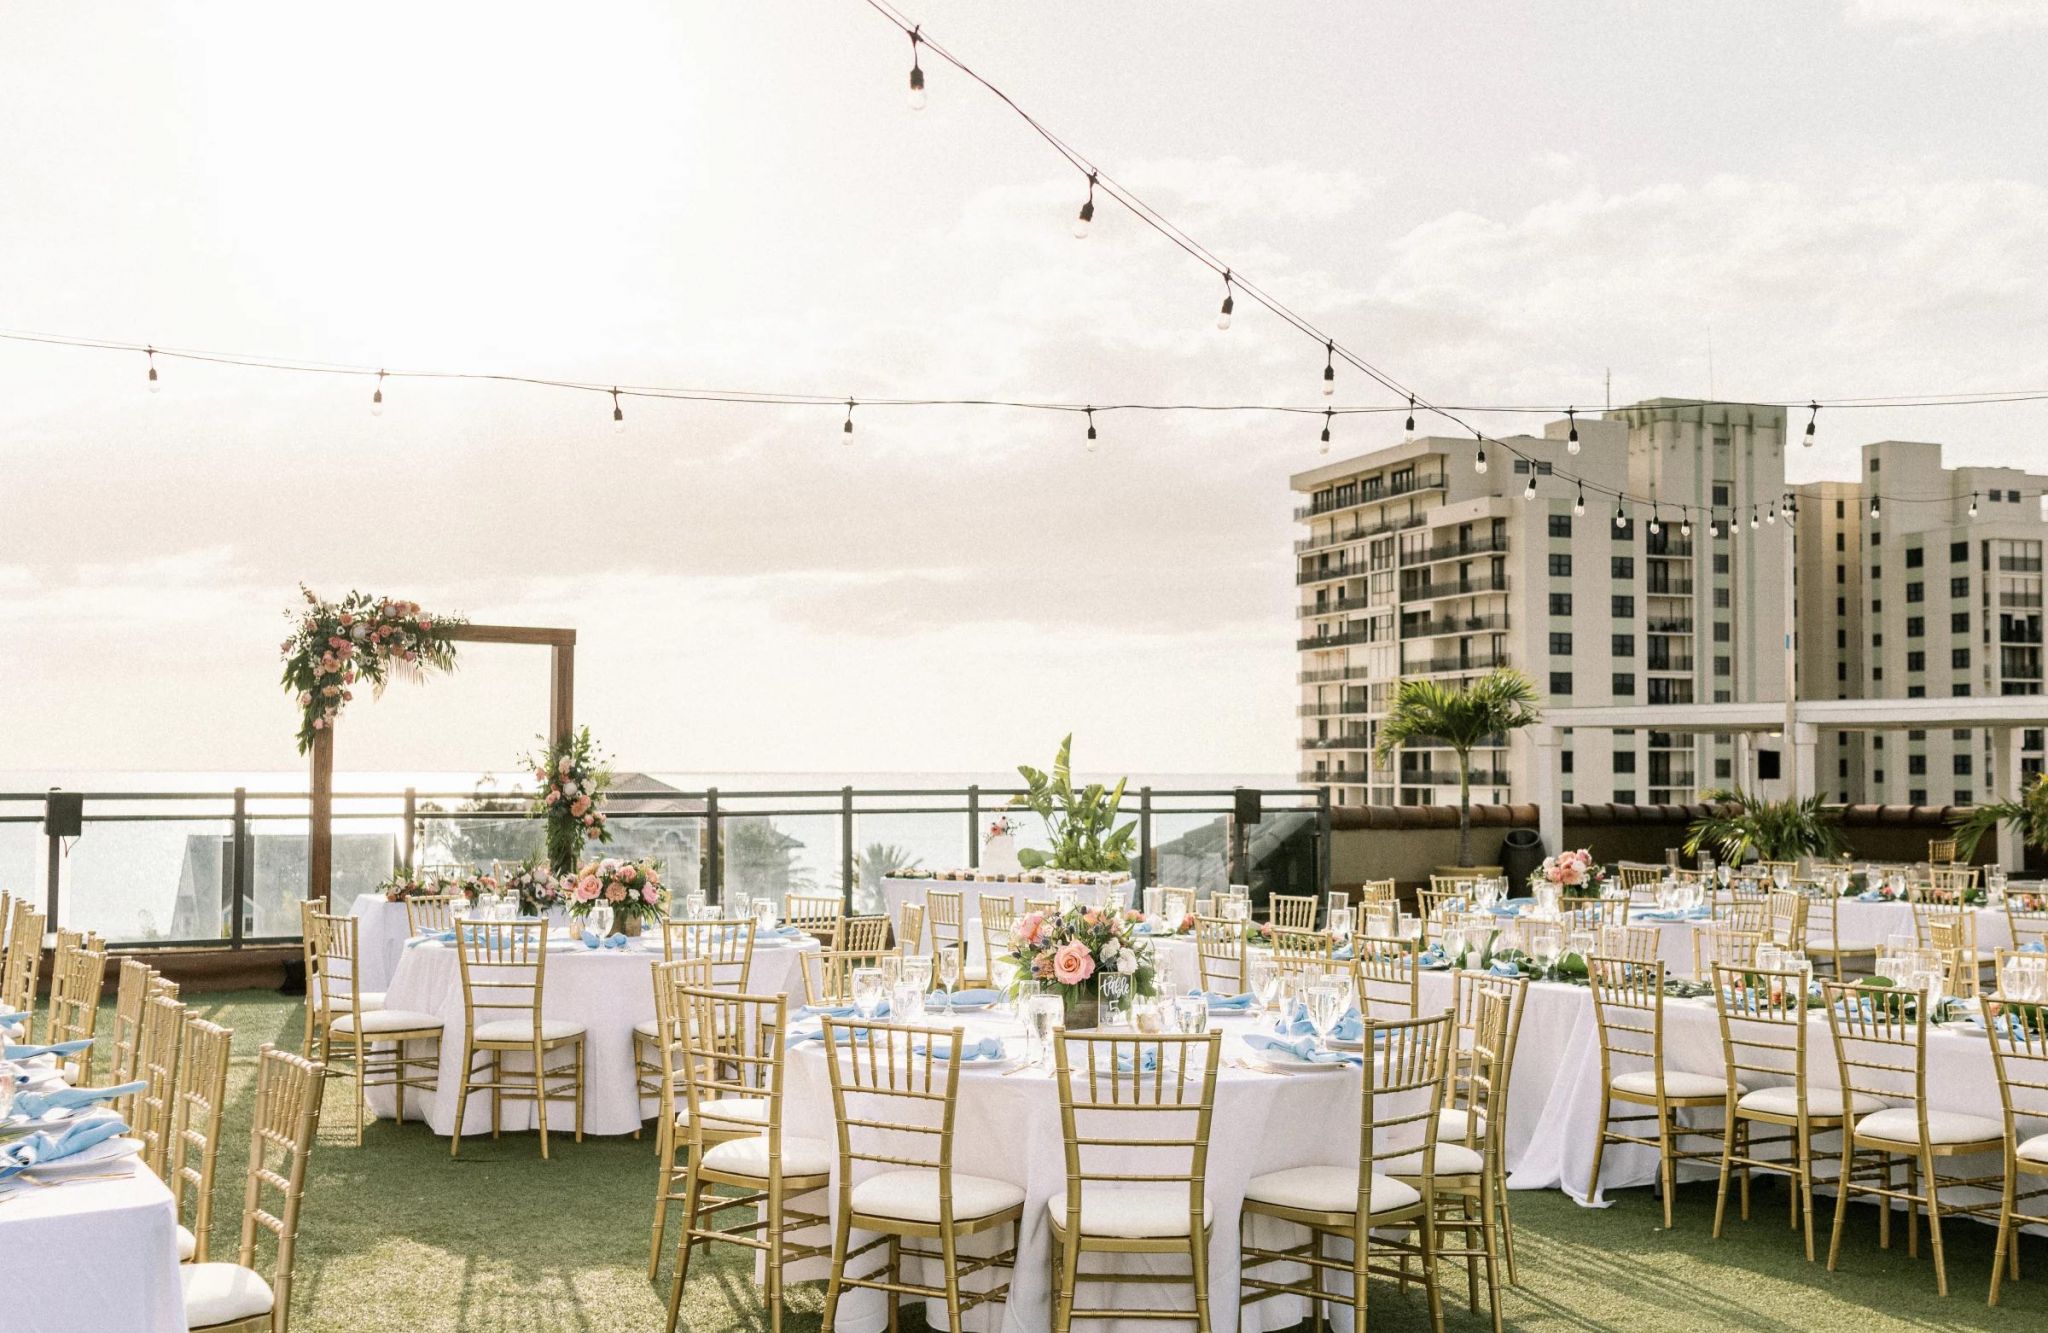 Gulfside rooftop space with chairs, a beautiful view, and tables, available for booking events or meetings